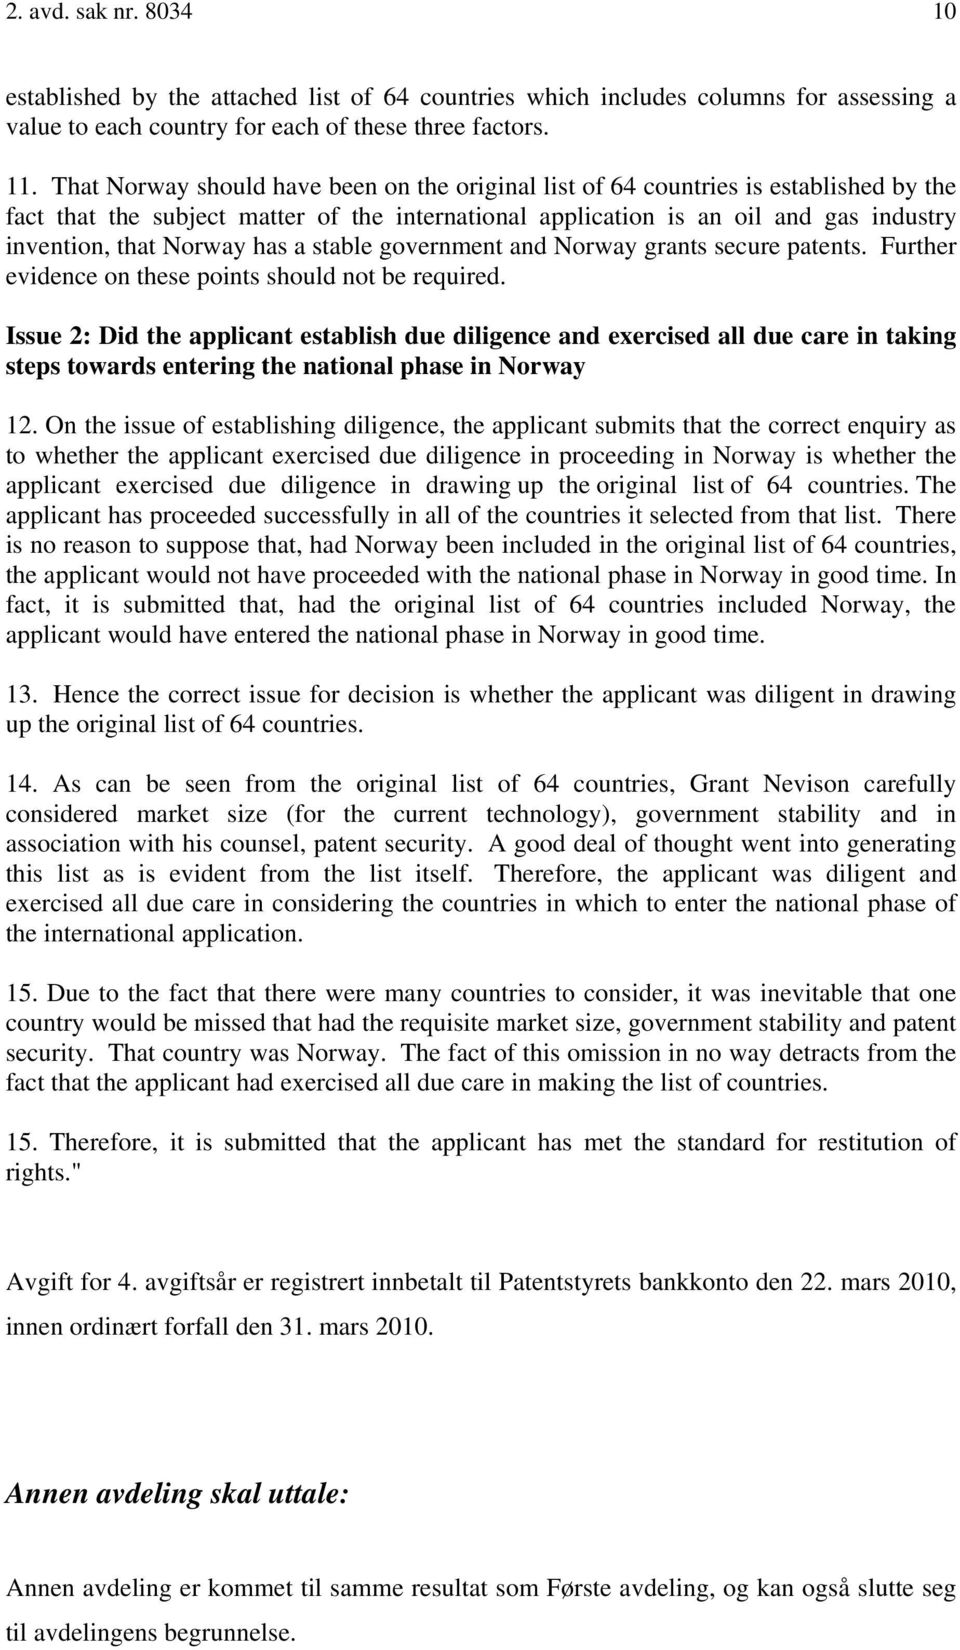 has a stable government and Norway grants secure patents. Further evidence on these points should not be required.